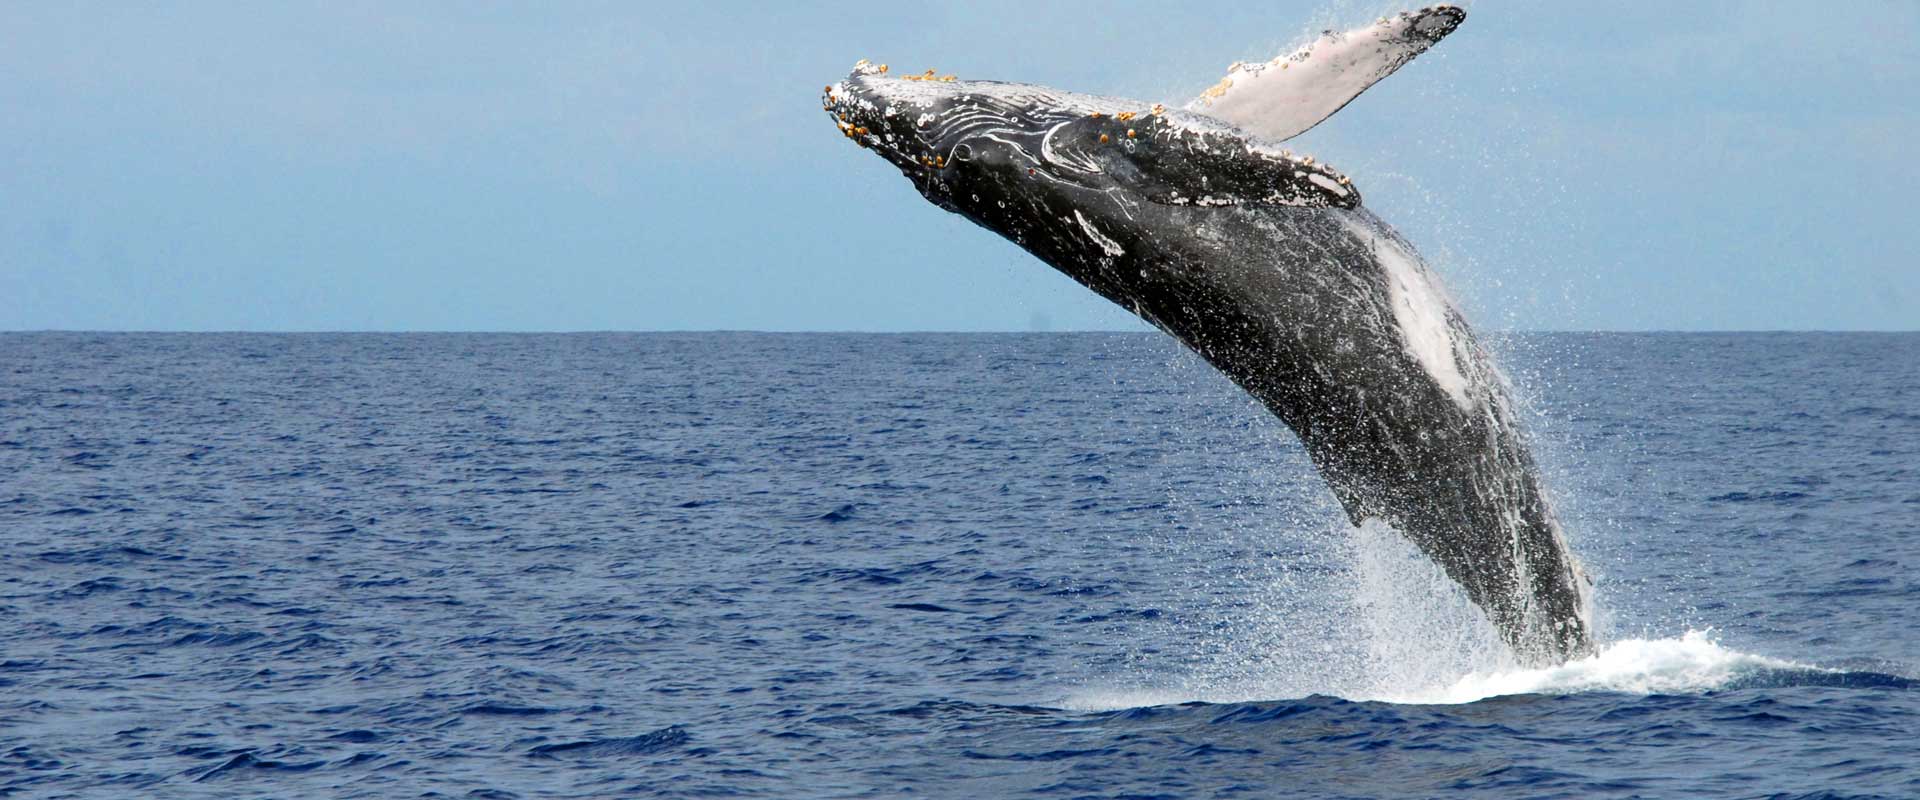 Whale Watching, Extremely popular during their season in Hawaii